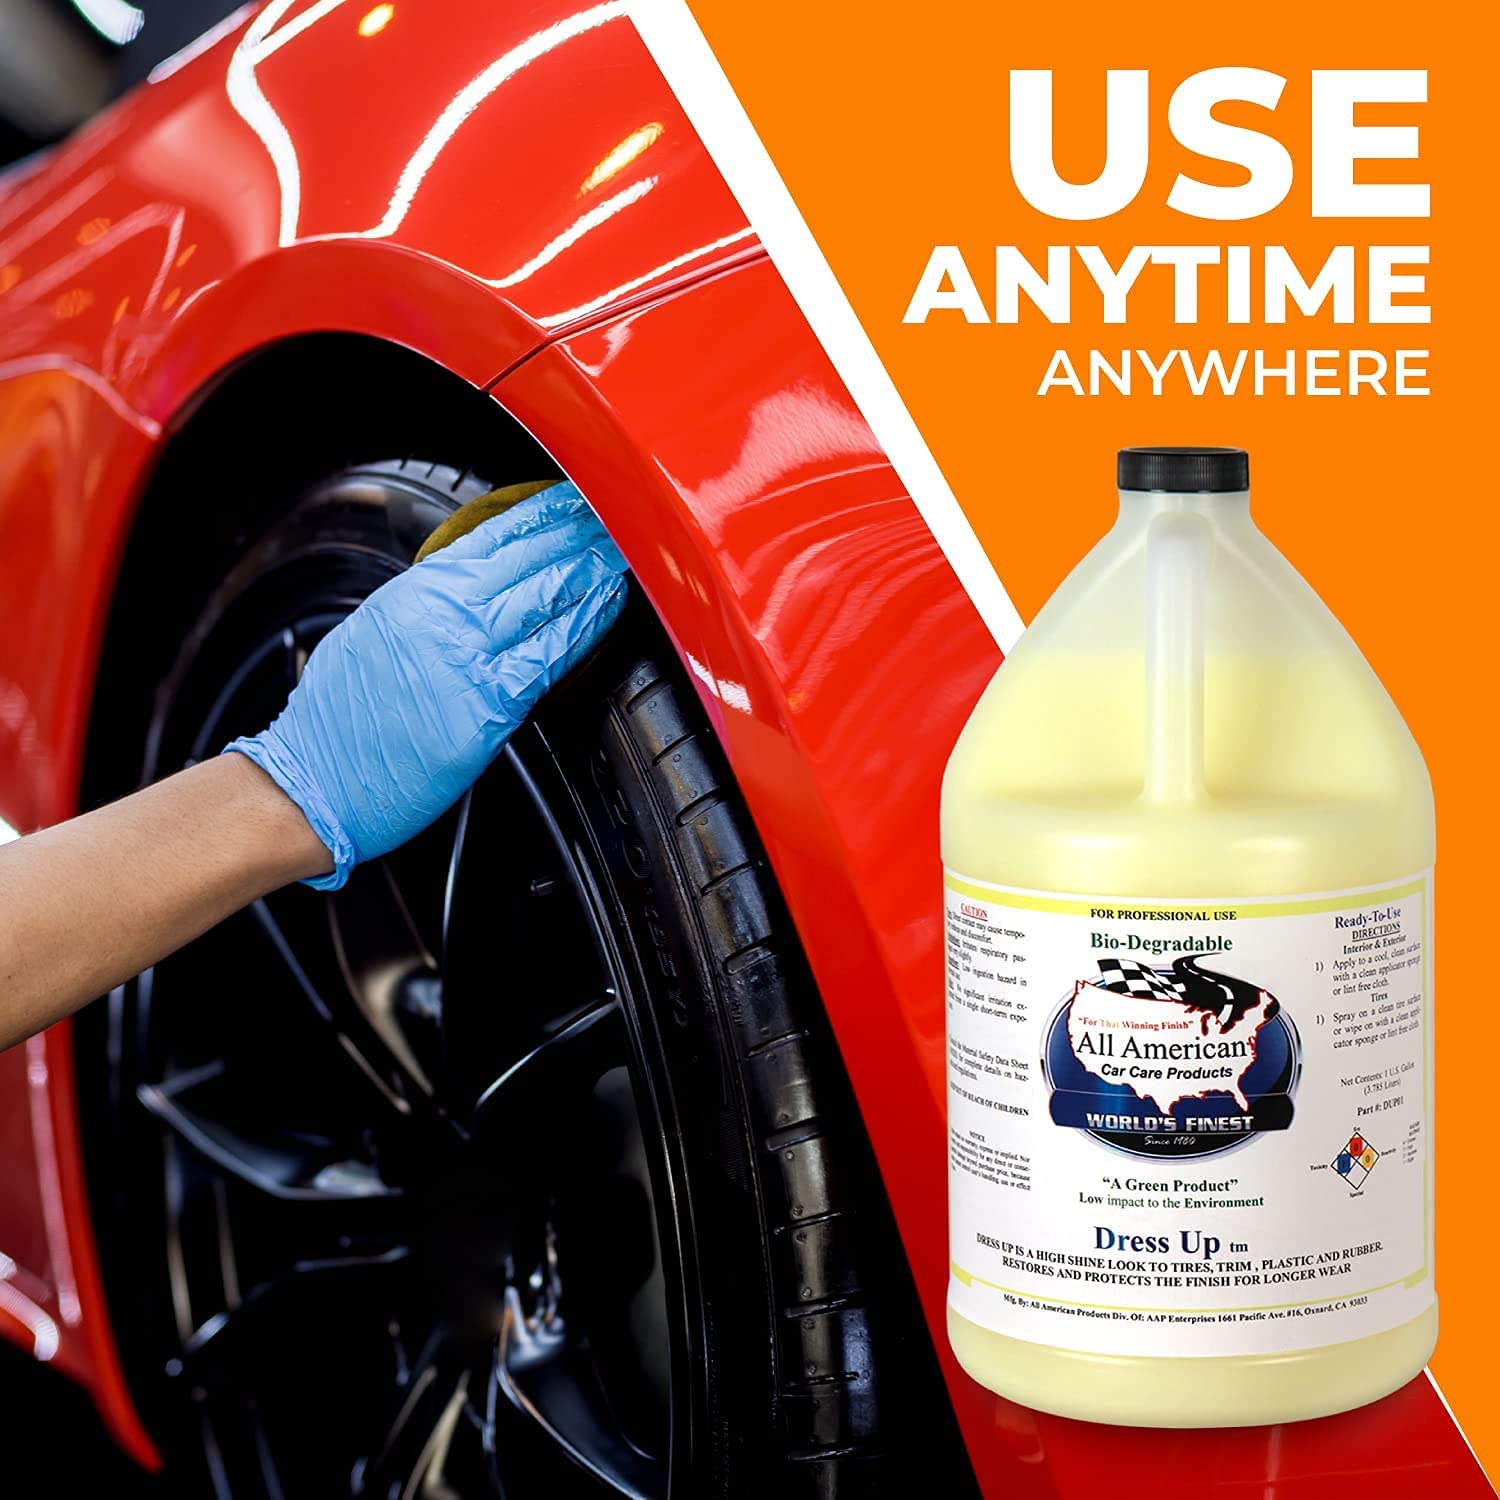 Tire Dress Up - High Gloss Shine Tire Dressing – All American Car Care  Products